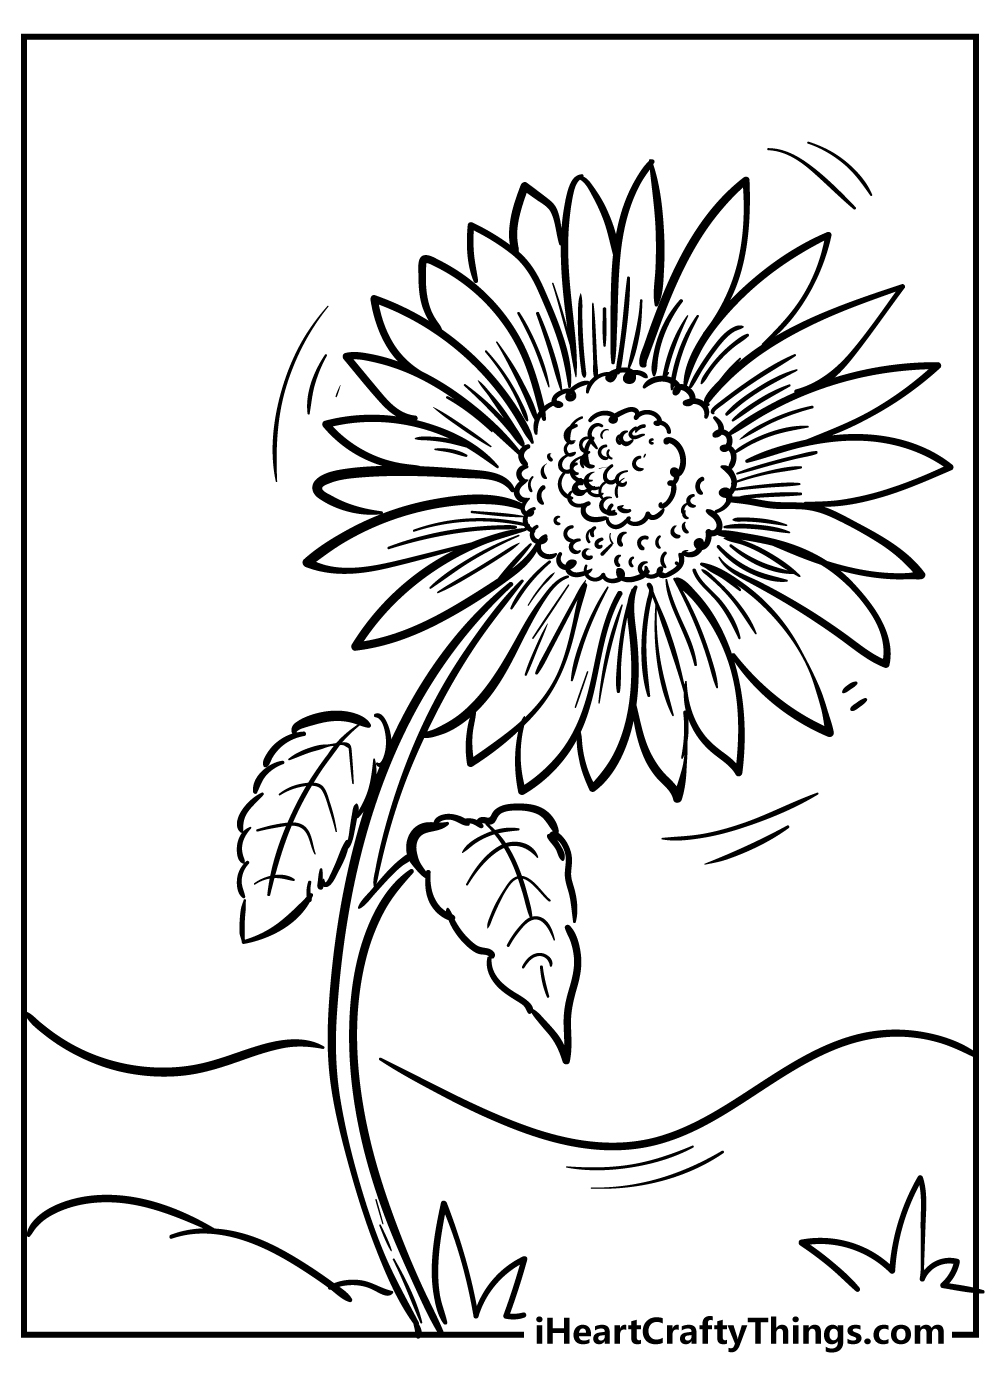 Sunflower coloring pages free printable